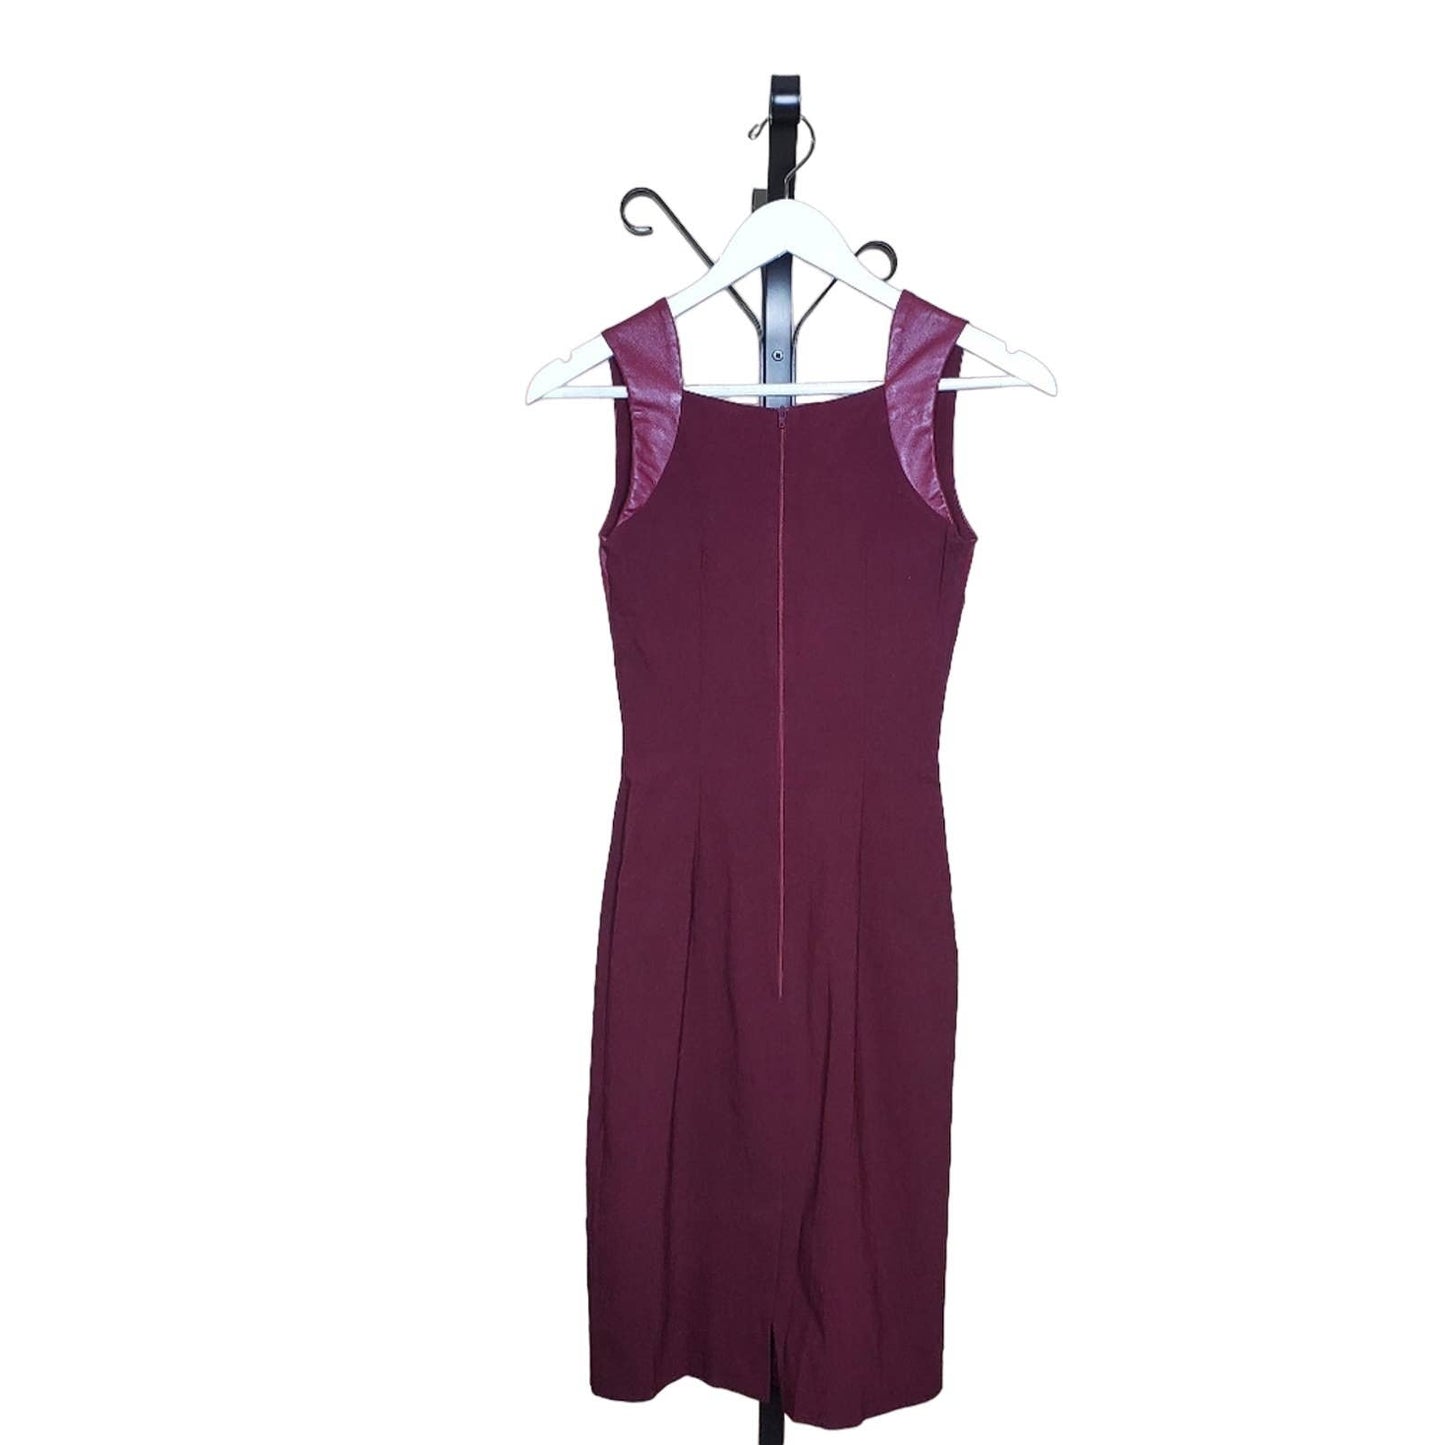 Hybrid Maroon Midi Dress with Faux Leather Detail, Size 2